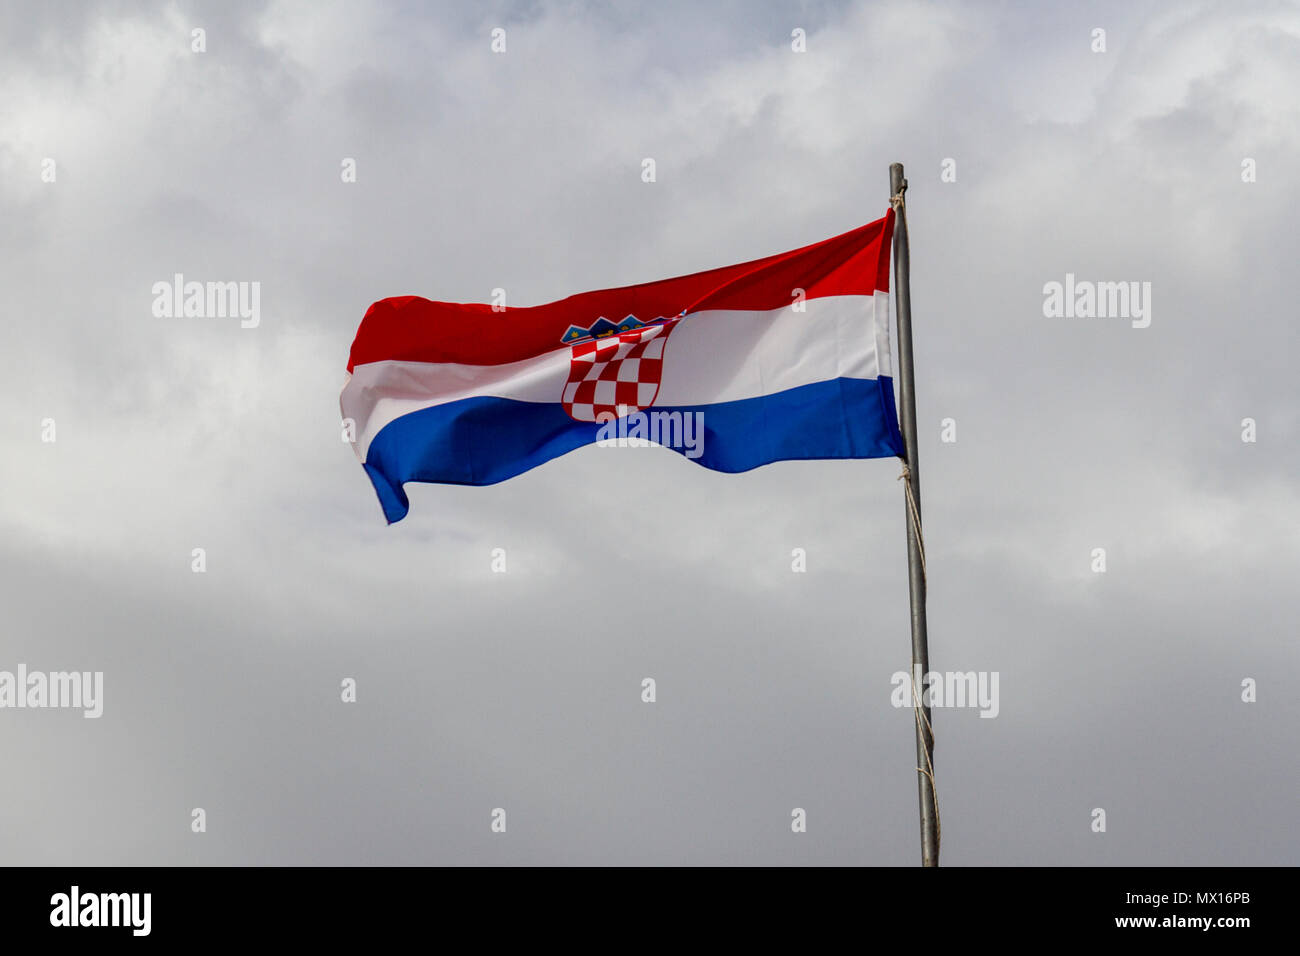 The Croatian flag flying against an overcast, cloudy background over the Old City of Dubrovnik, Croatia. Stock Photo